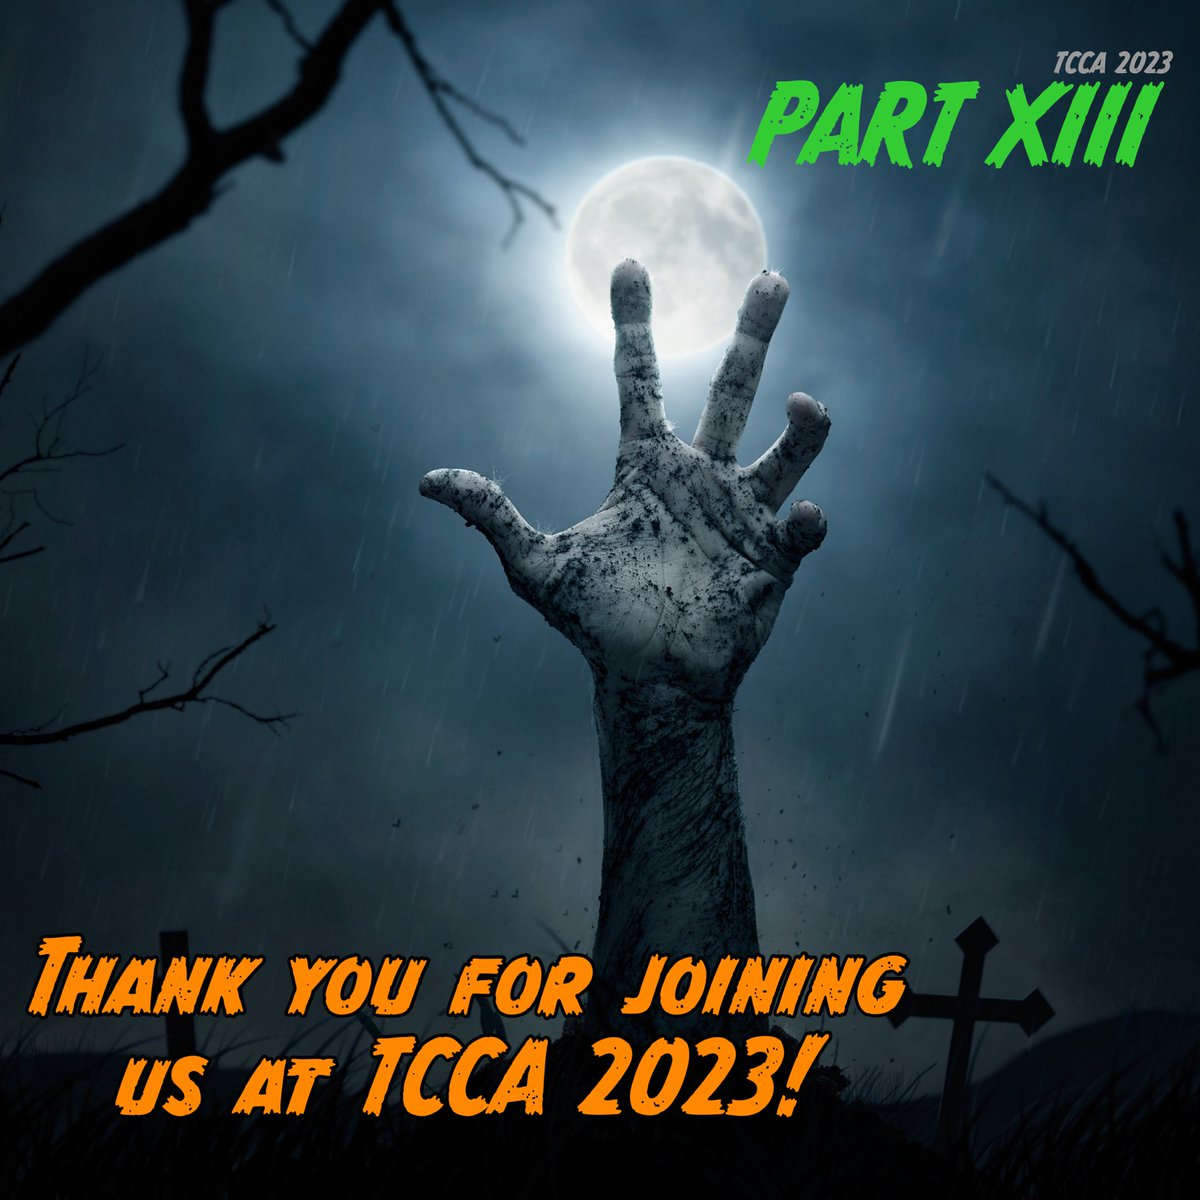 Thank you to all that attended #TCCA2023! We hope you enjoyed it and had a thrilling time with the various sessions, speakers, and educators! Keep an eye out on your registered emails for further information on certificates and more! #DLSbyDLS @AldineDLS @AldineISDTech